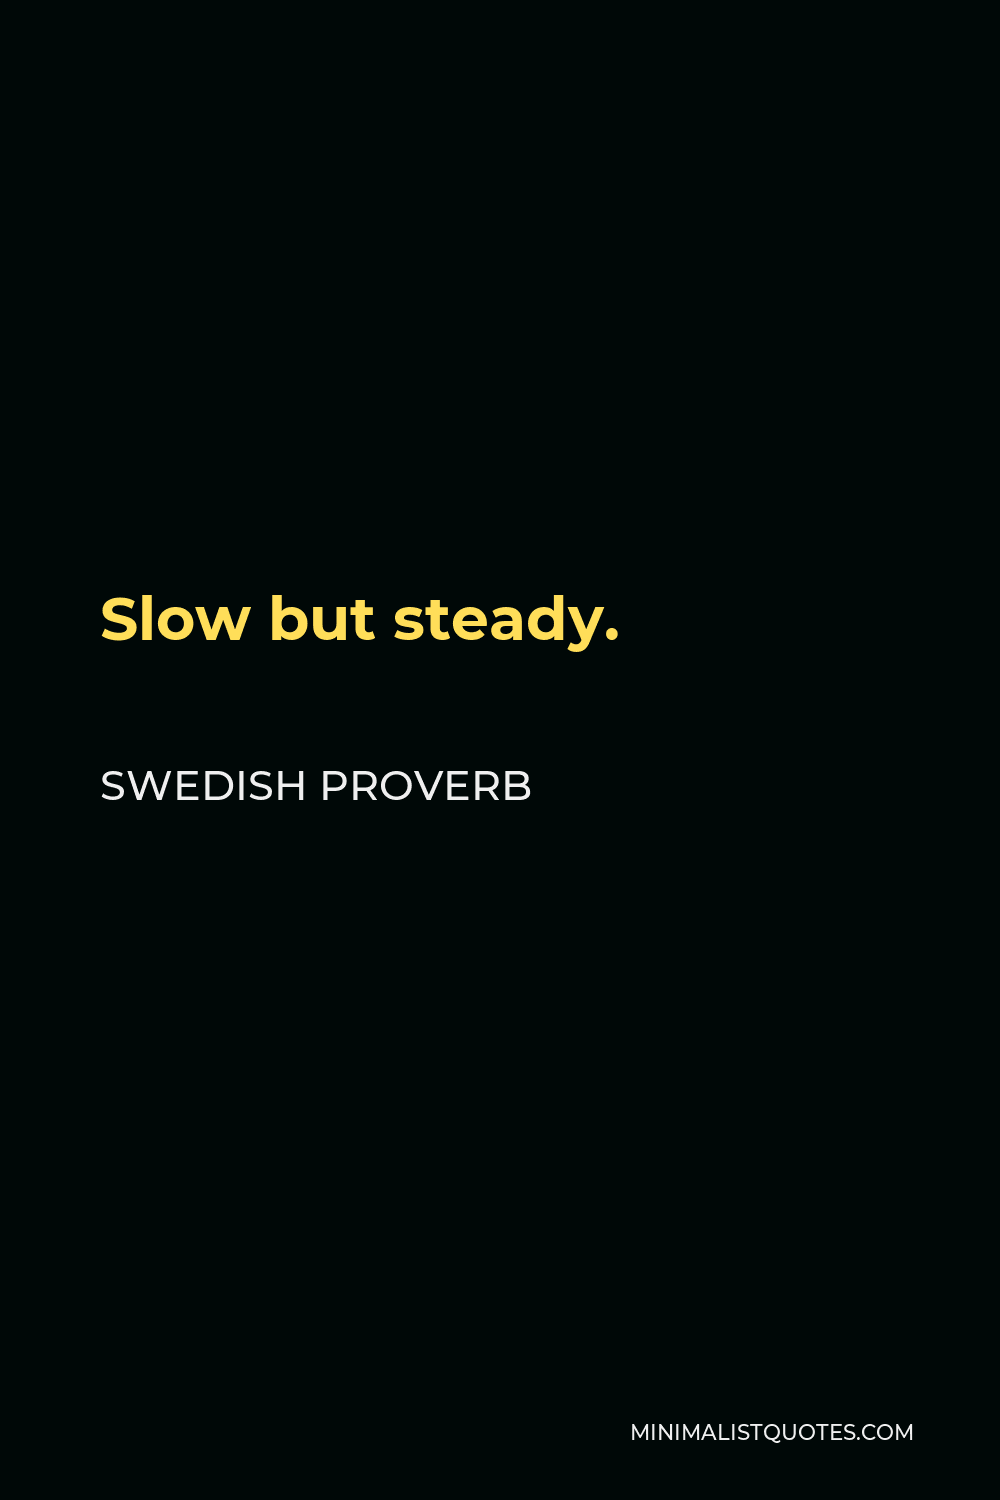 Swedish Proverb Quote - Slow but steady.